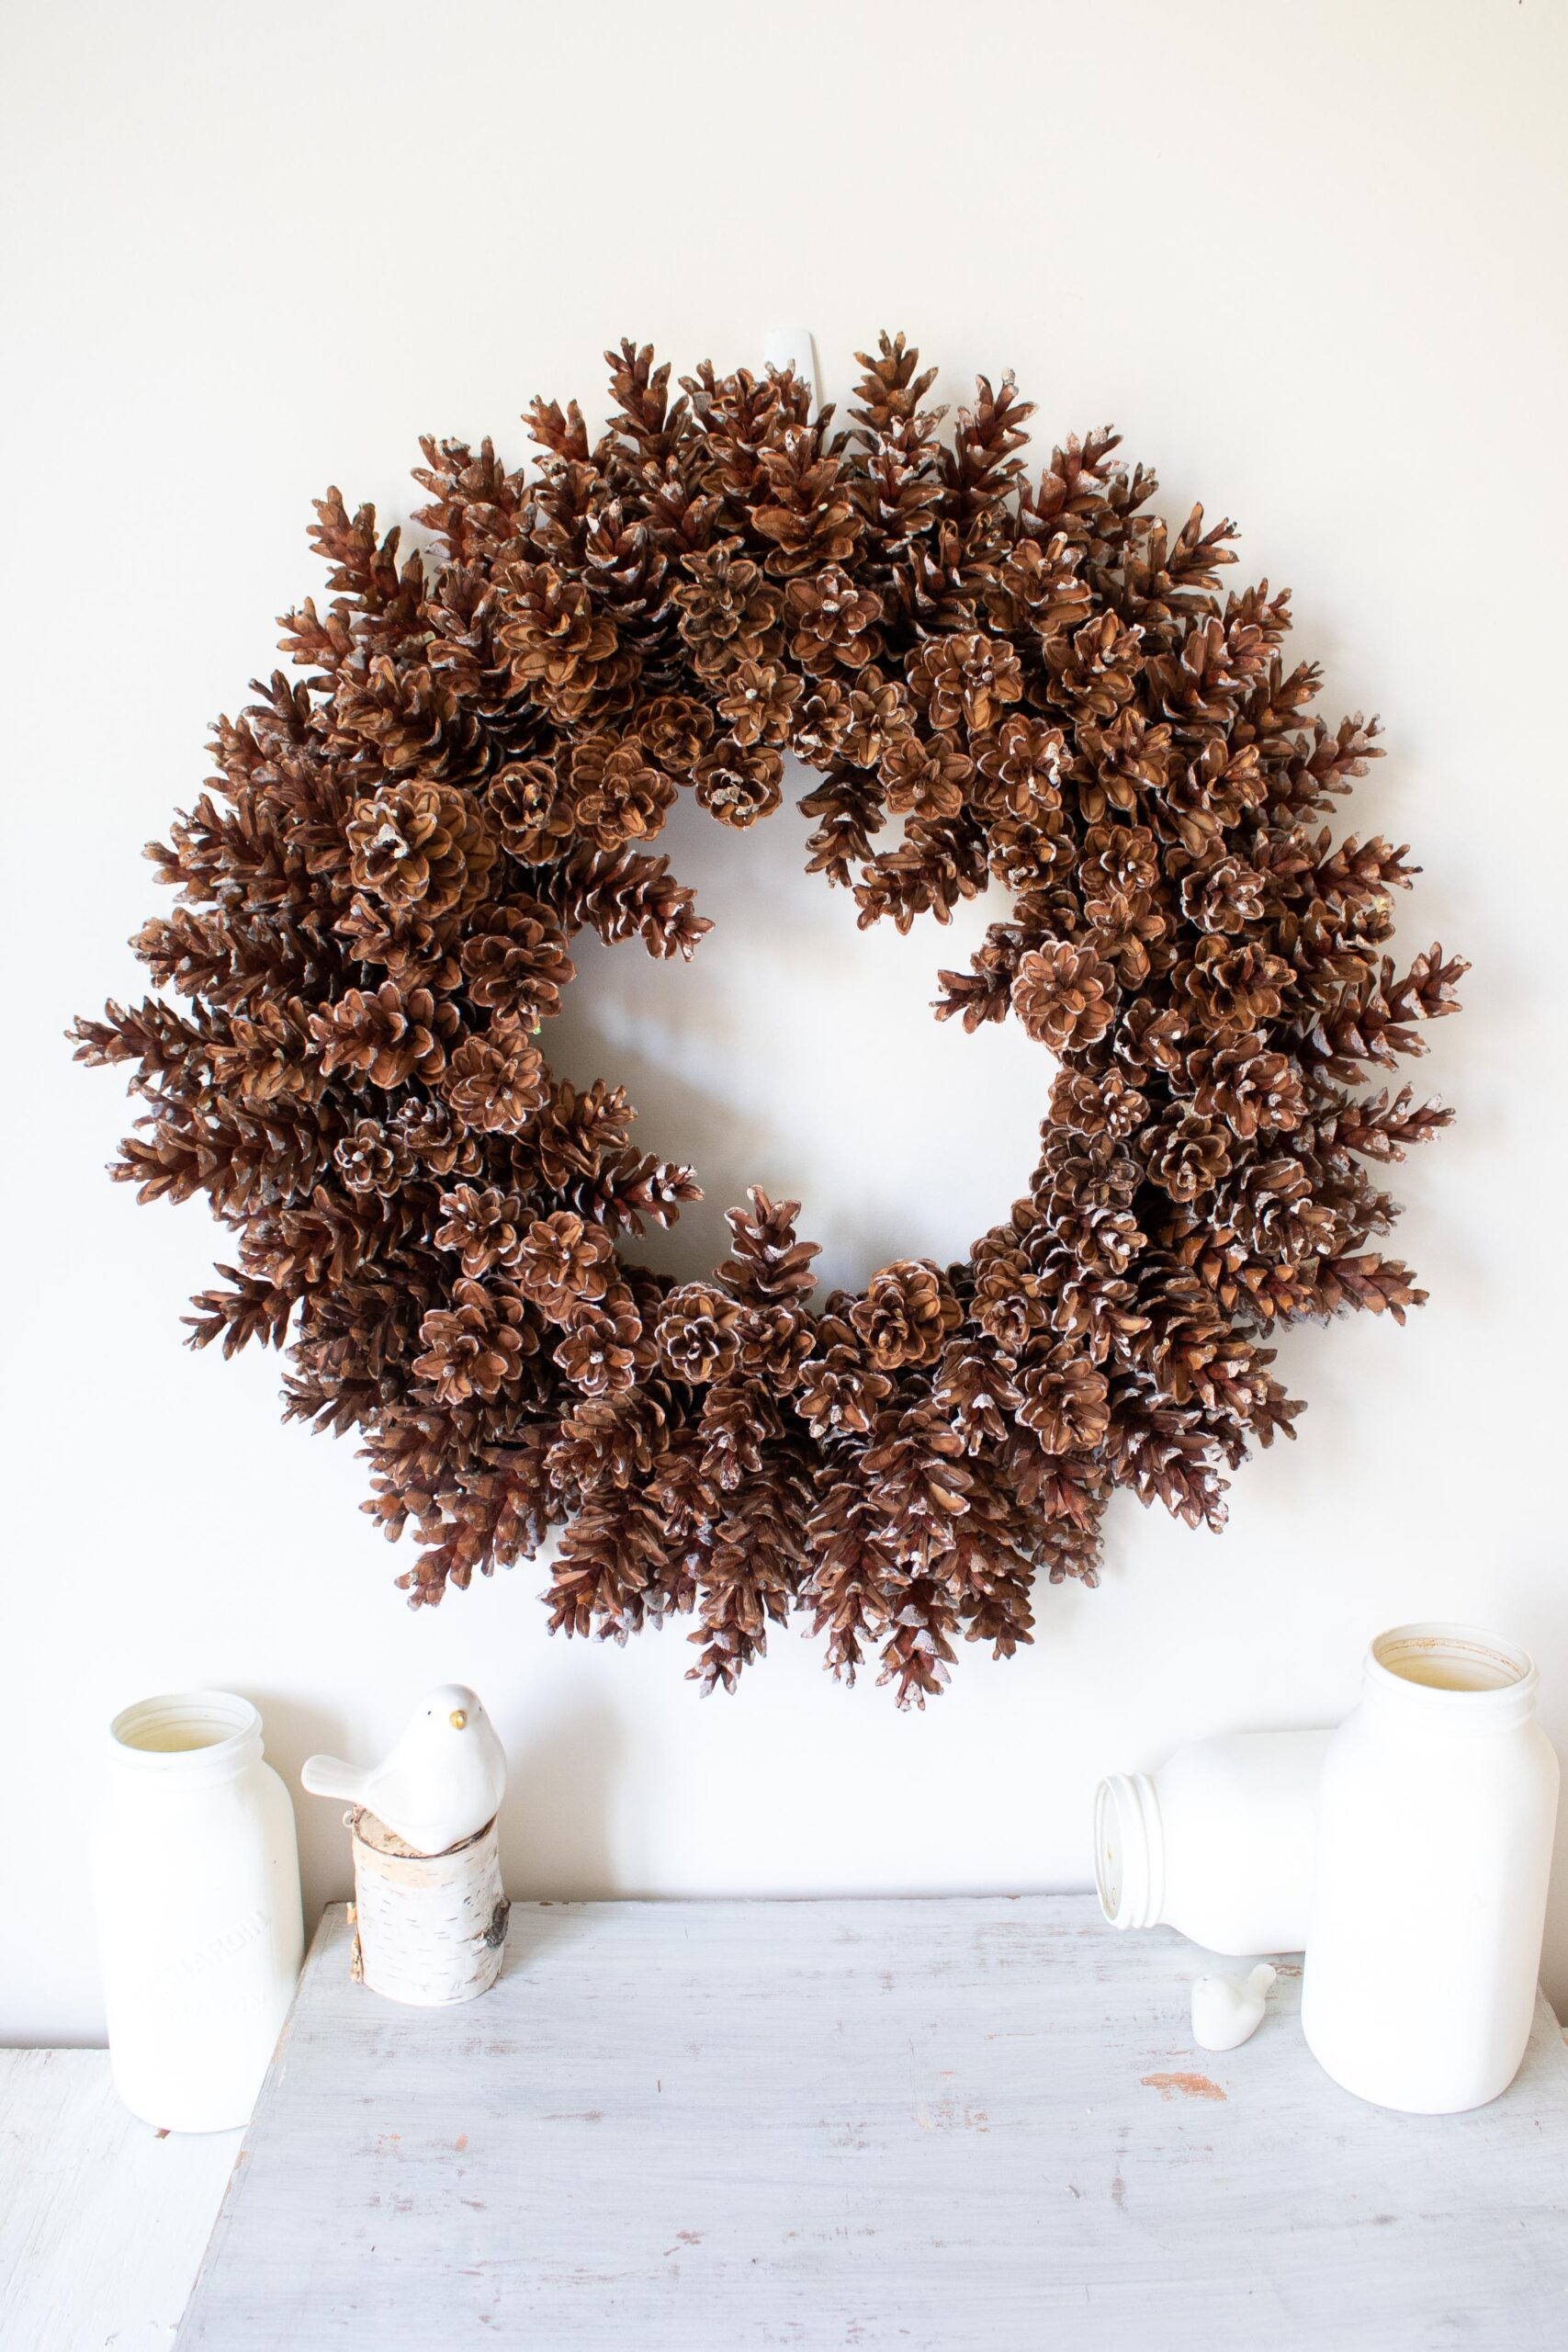 Completed pineone wreath hung on a wall with white accessories.